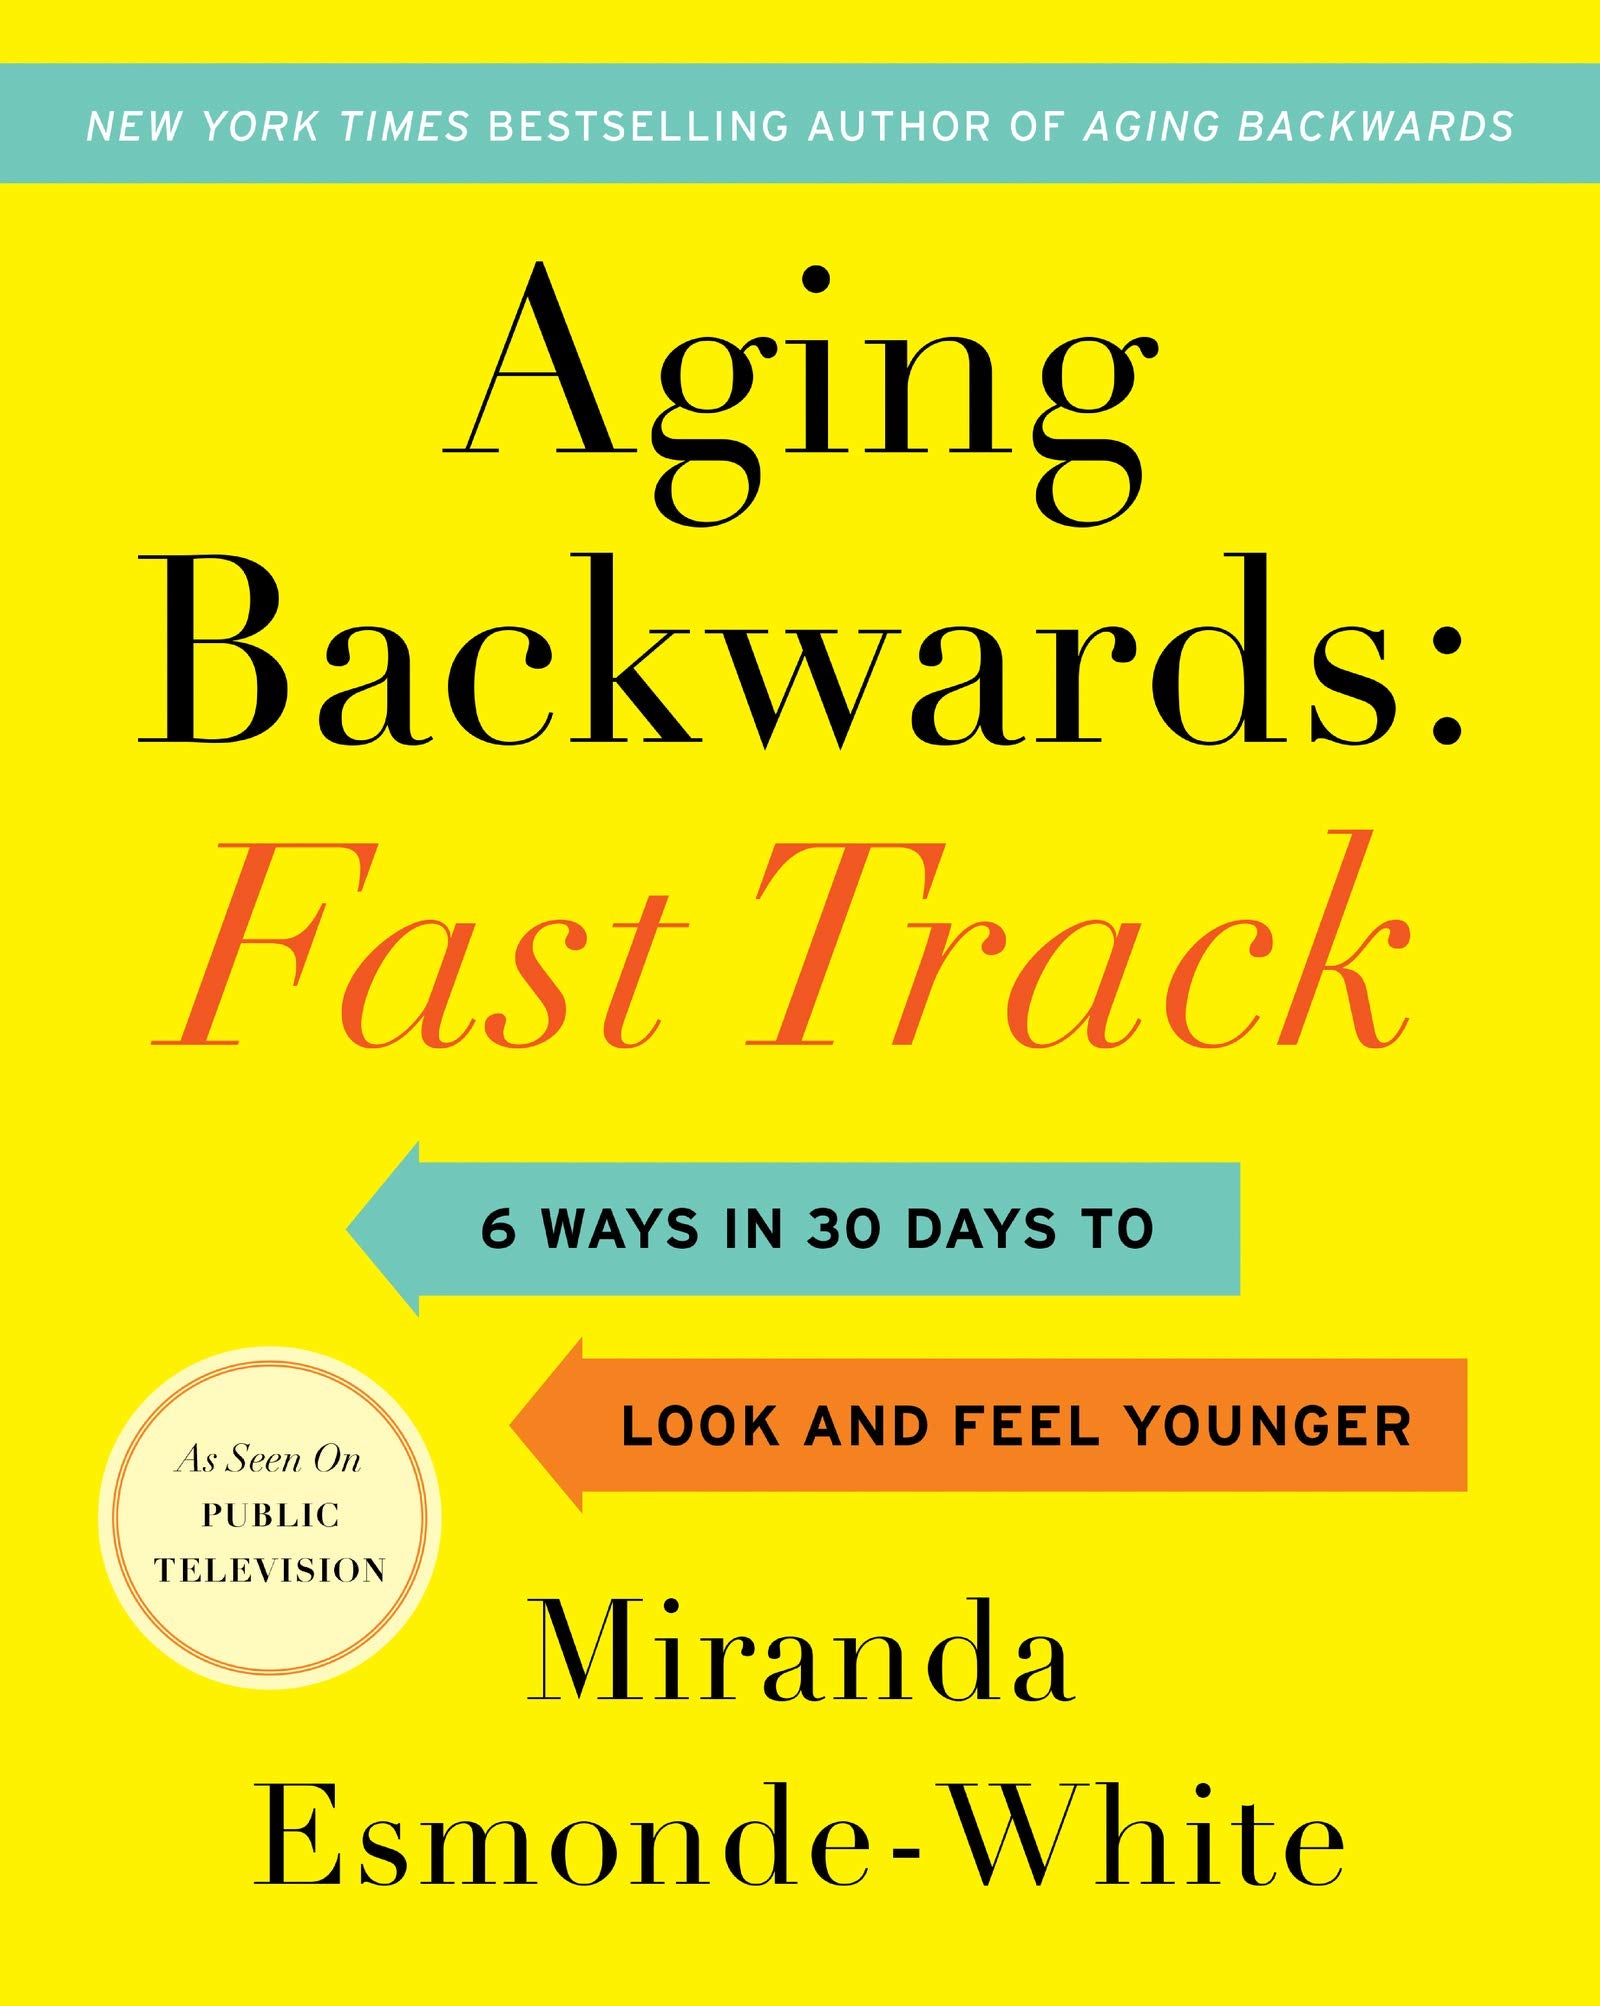 Aging Backwards Fast Track: 6 Ways in 30 Days to Look and Feel Younger